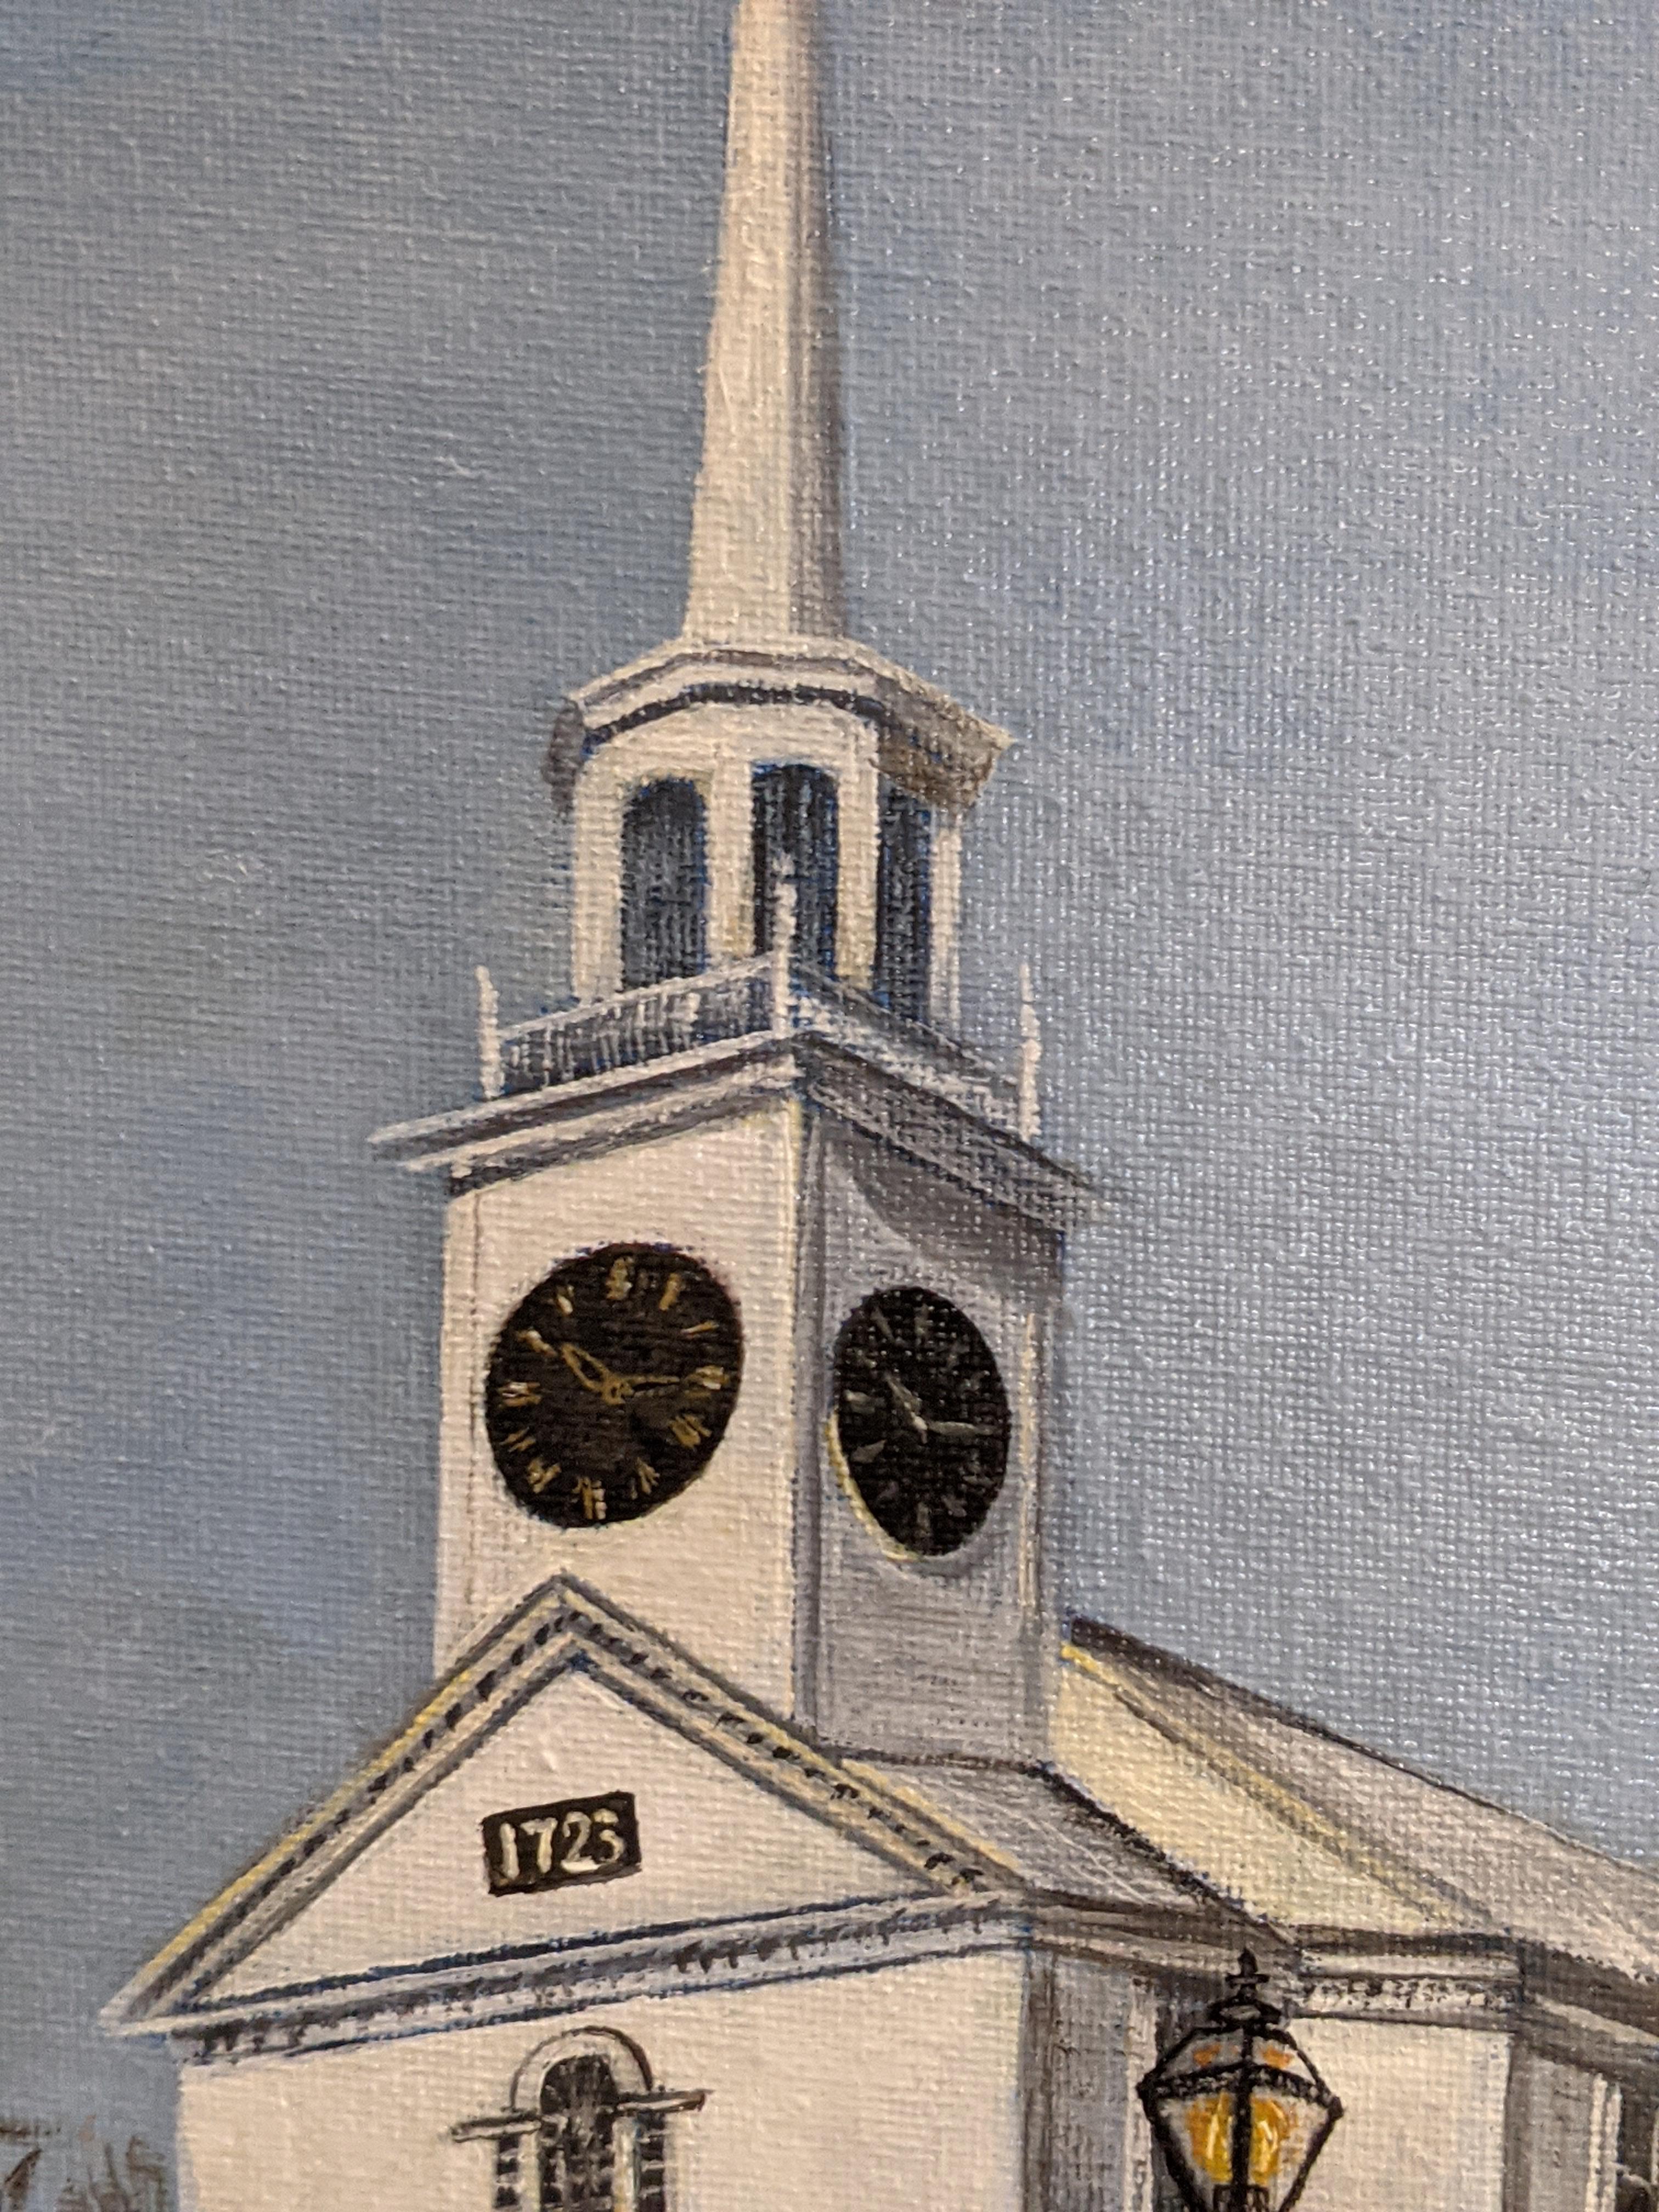 Artist Commentary:

I started a series of paintings of places in the town I live in: Shrewsbury, Massachusetts. In many New England small towns, the most important buildings are the white protestant churches in the commons. In Shrewsbury, this